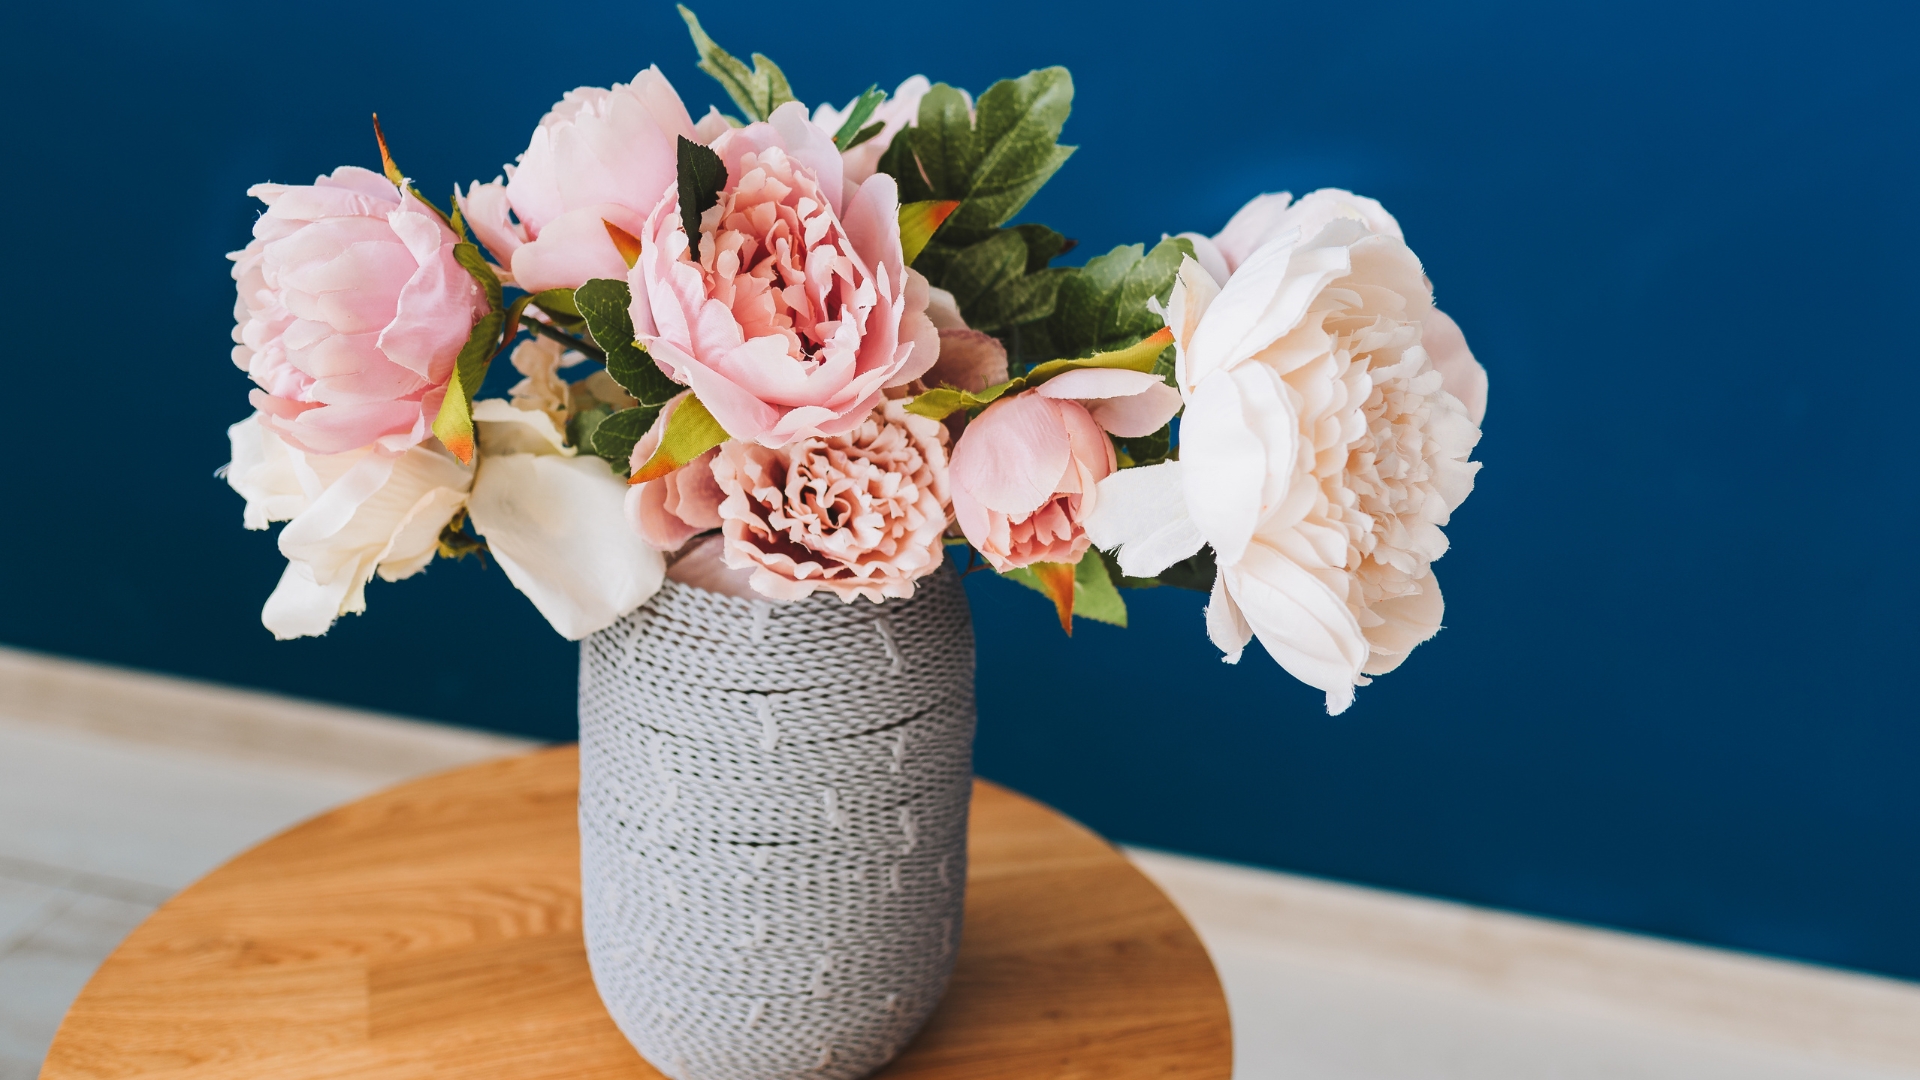 Here’s How To Force Peonies To Open And Bloom Quickly